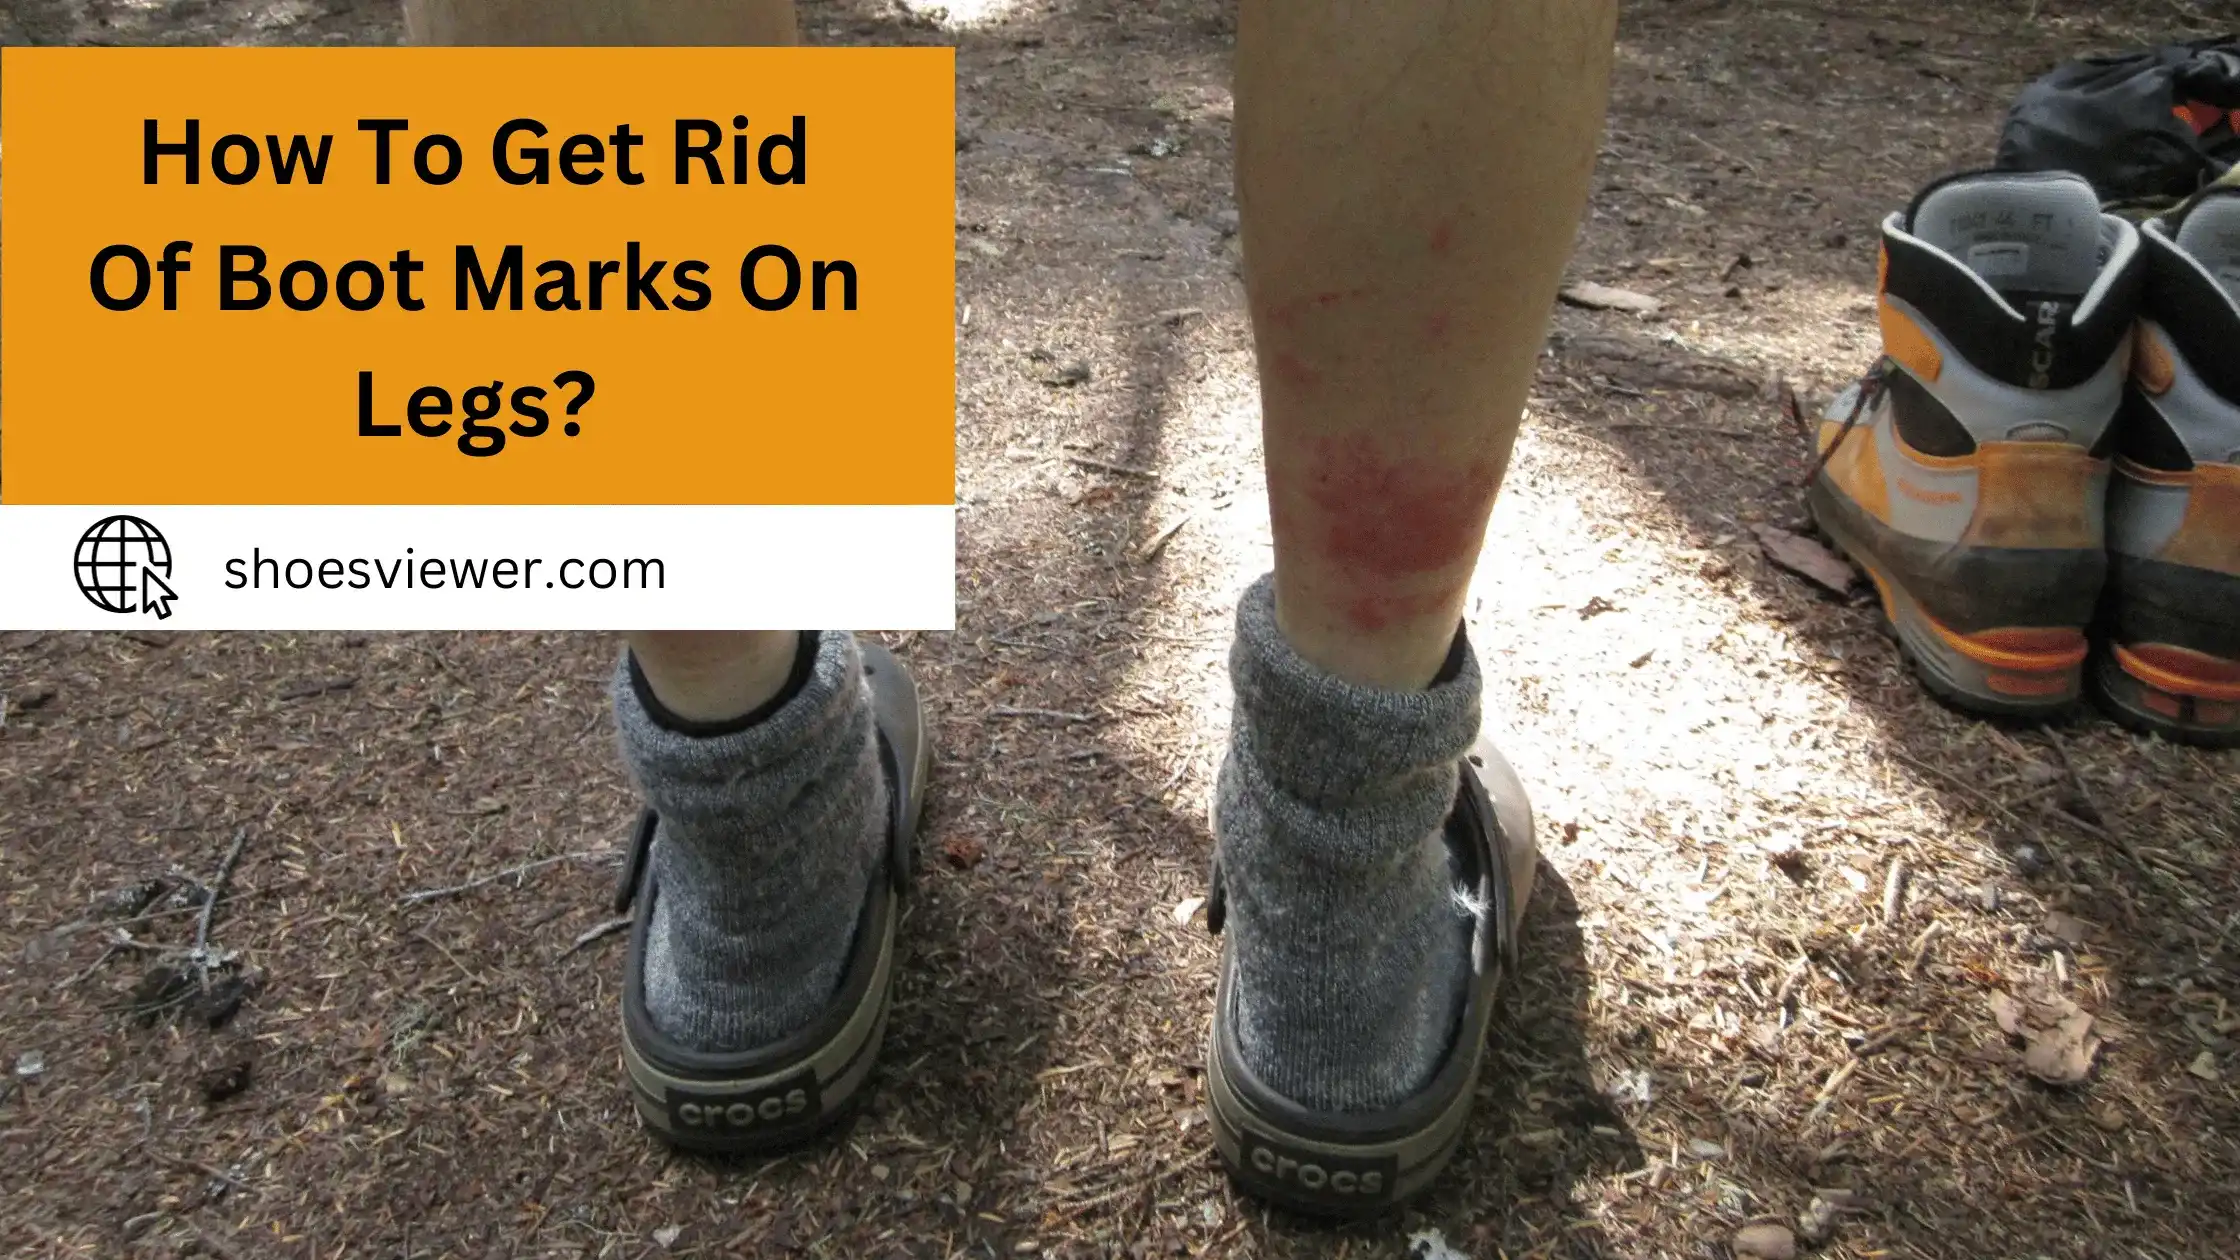 How To Get Rid Of Boot Marks On Legs? Detailed Information